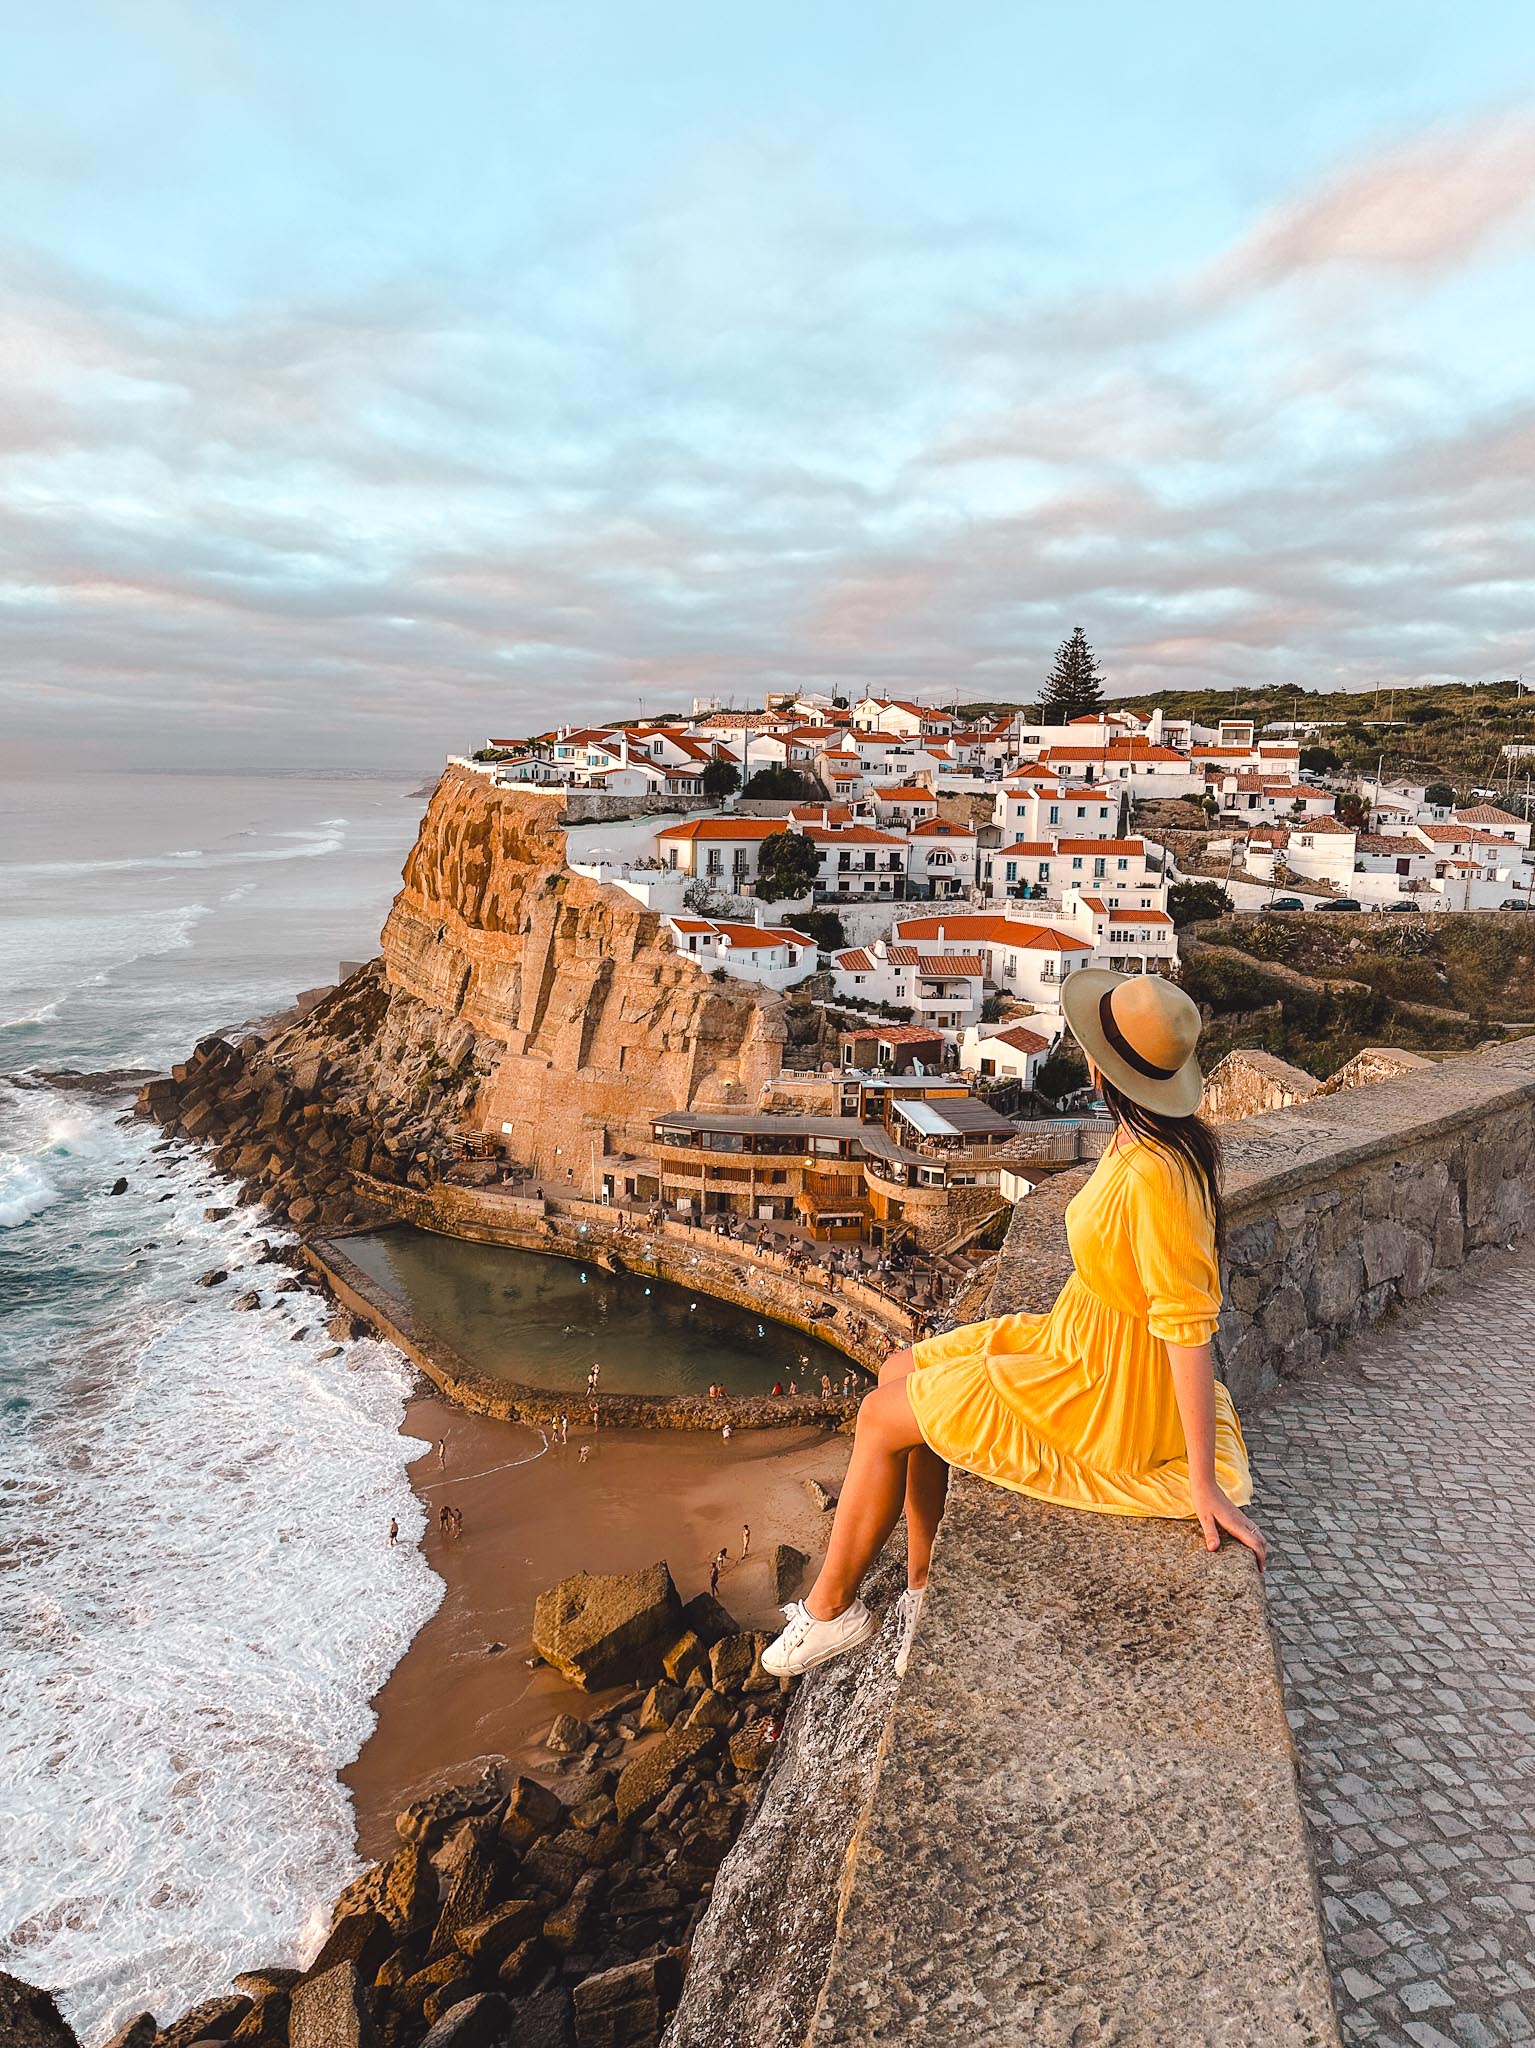 Azenhas do Mar in Portugal - coastal fishing village with rock pool and sweeping views over the Atlantic Ocean